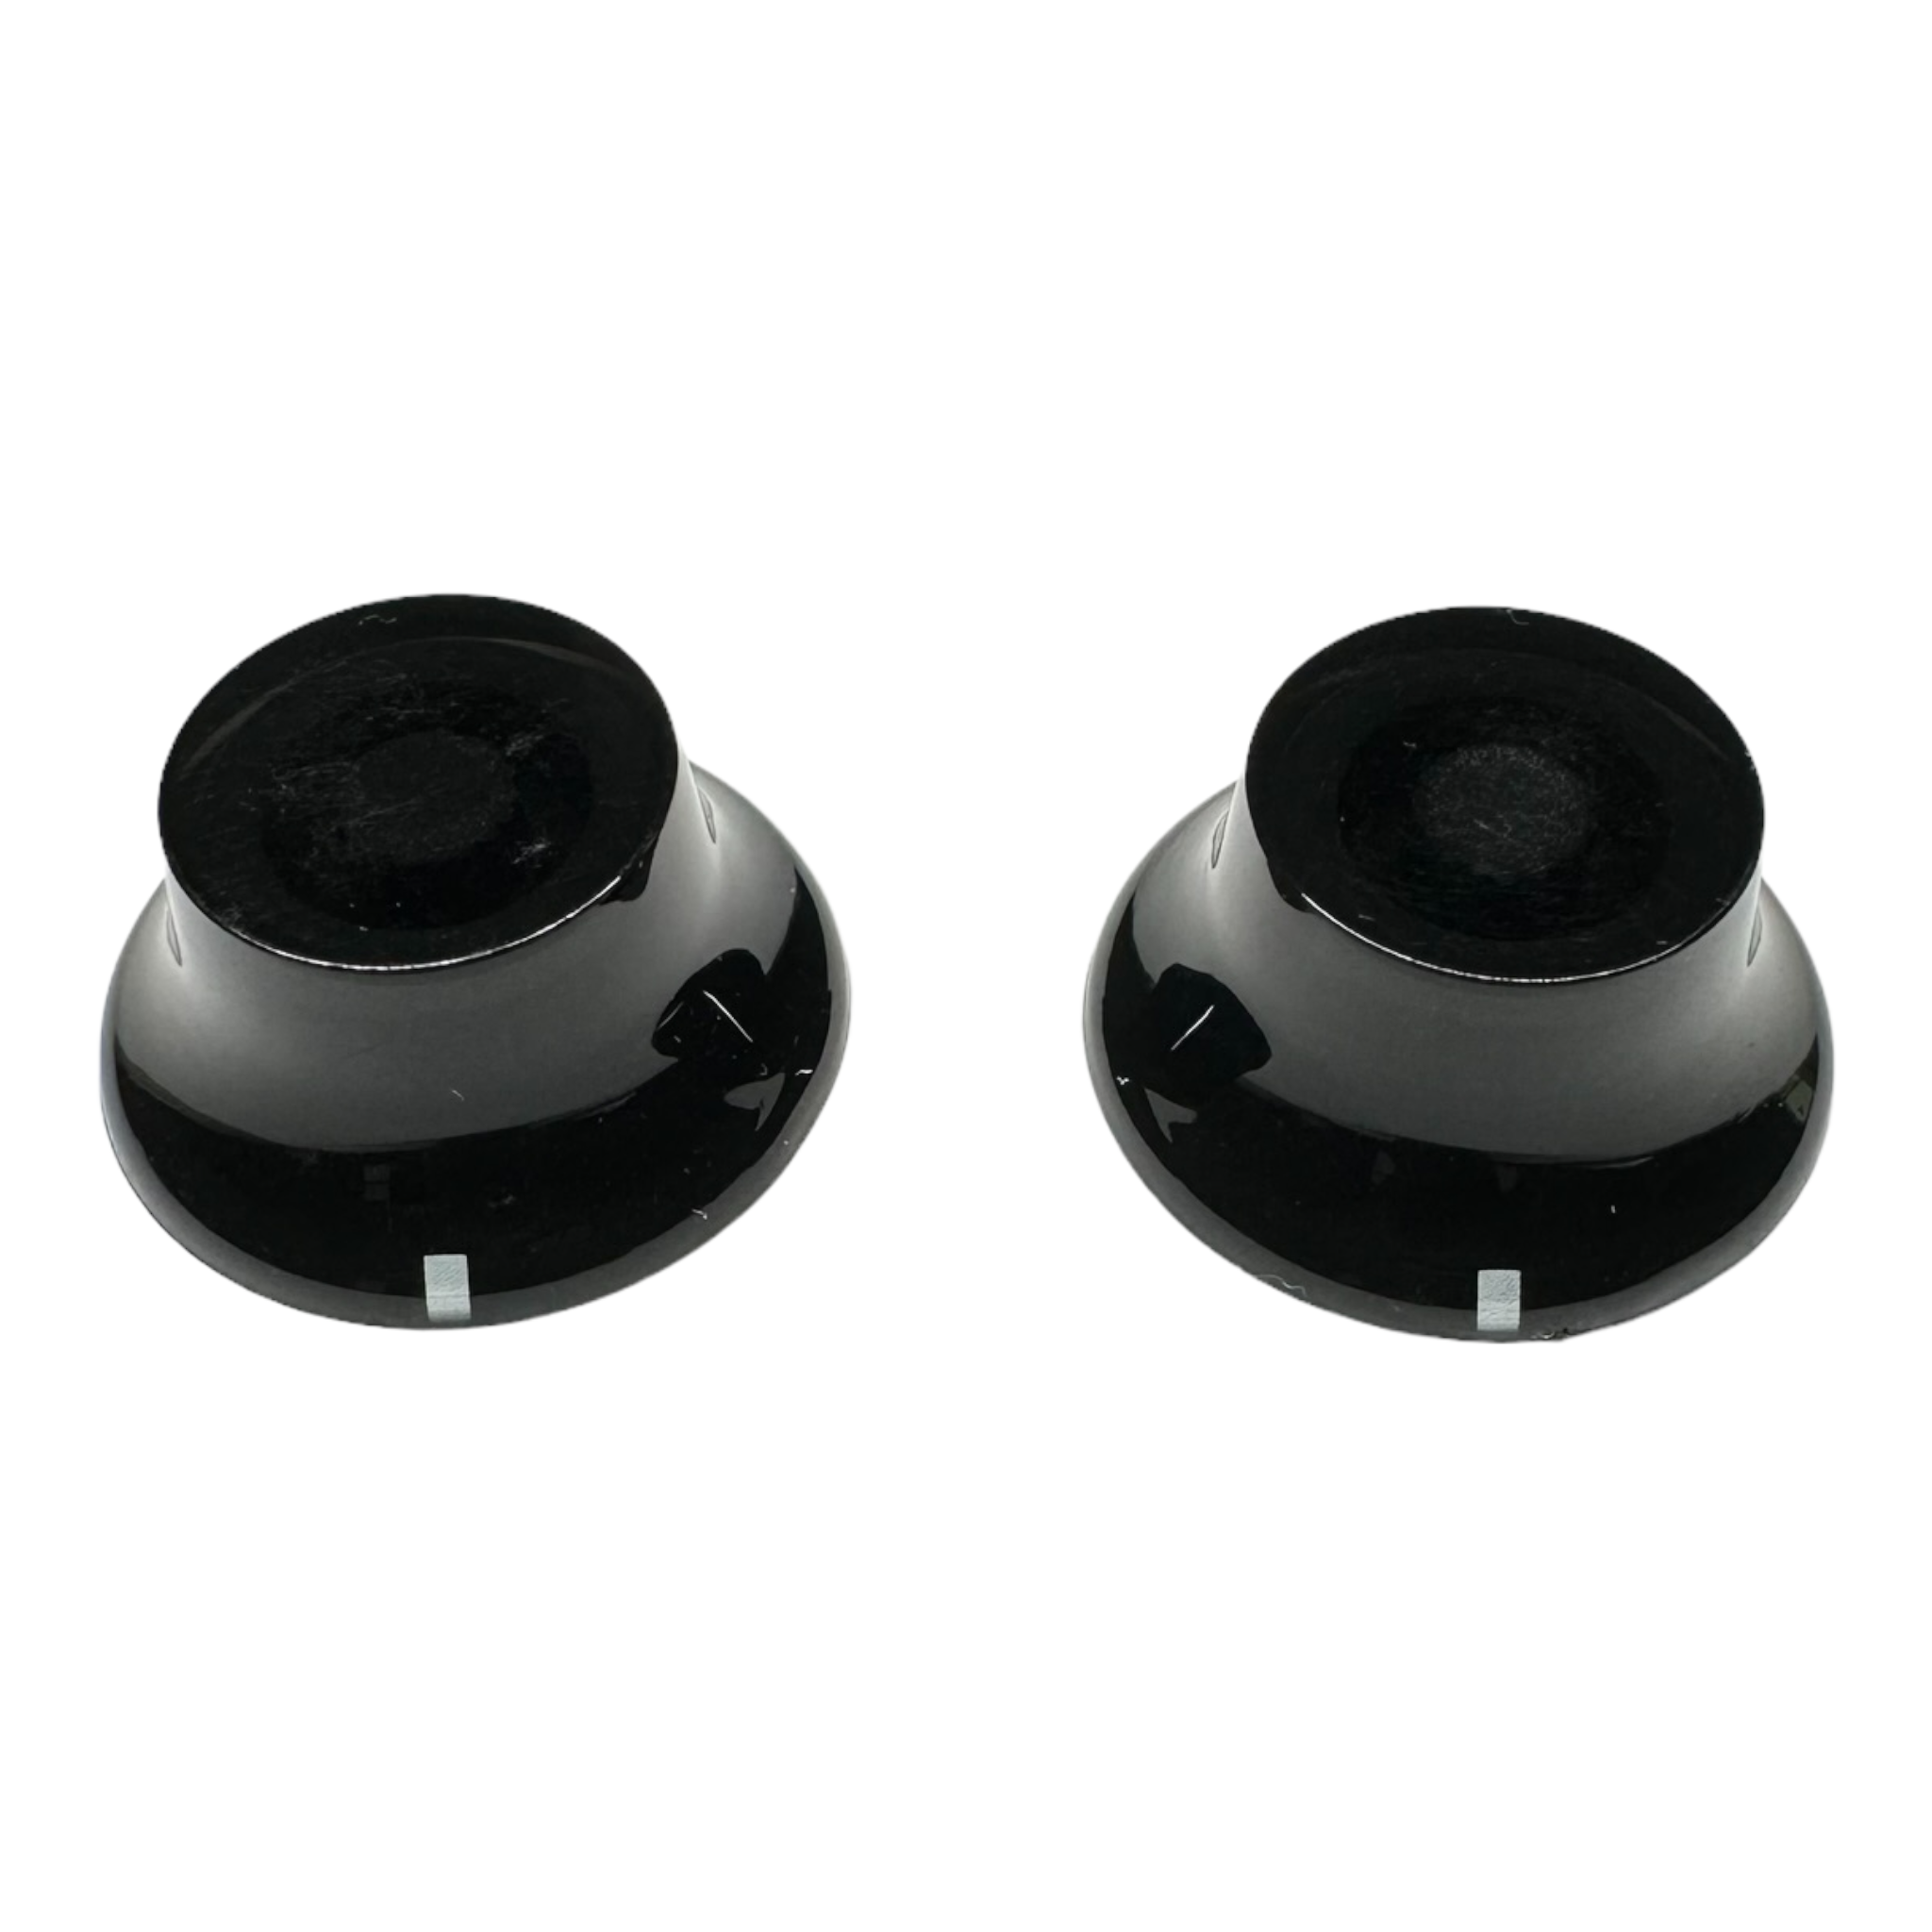 AxLabs Bell Knobs - No Numbers (Set of 2) - AxLabs